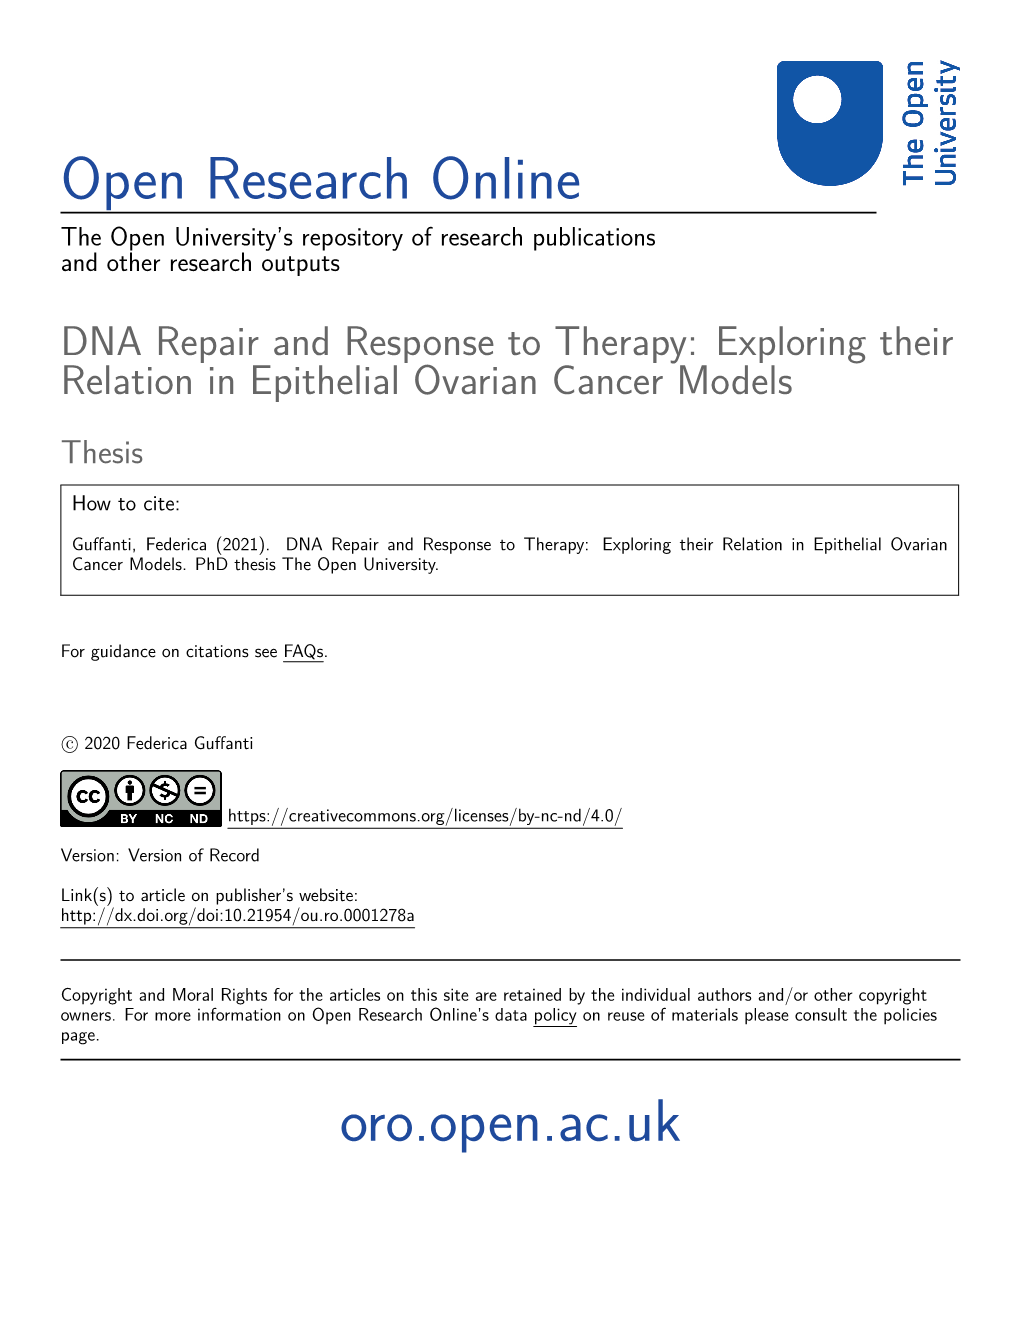 DNA Repair and Response to Therapy: Exploring Their Relation in Epithelial Ovarian Cancer Models